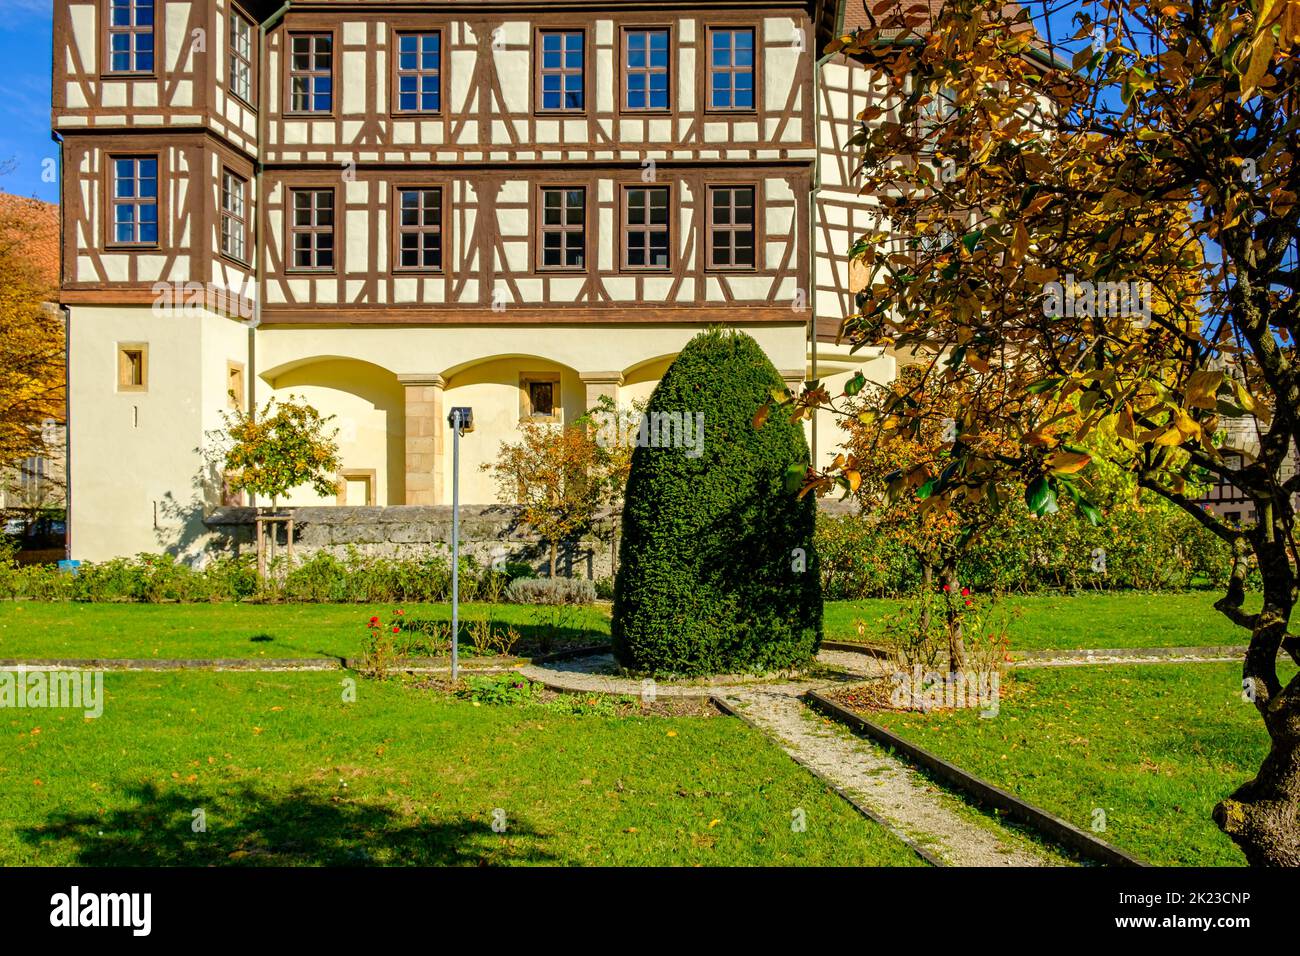 Urach Residential Palace, a Gothic and Renaissance edifice, Bad Urach, Swabian Alb, Baden-Württemberg, Germany, Europe. Stock Photo